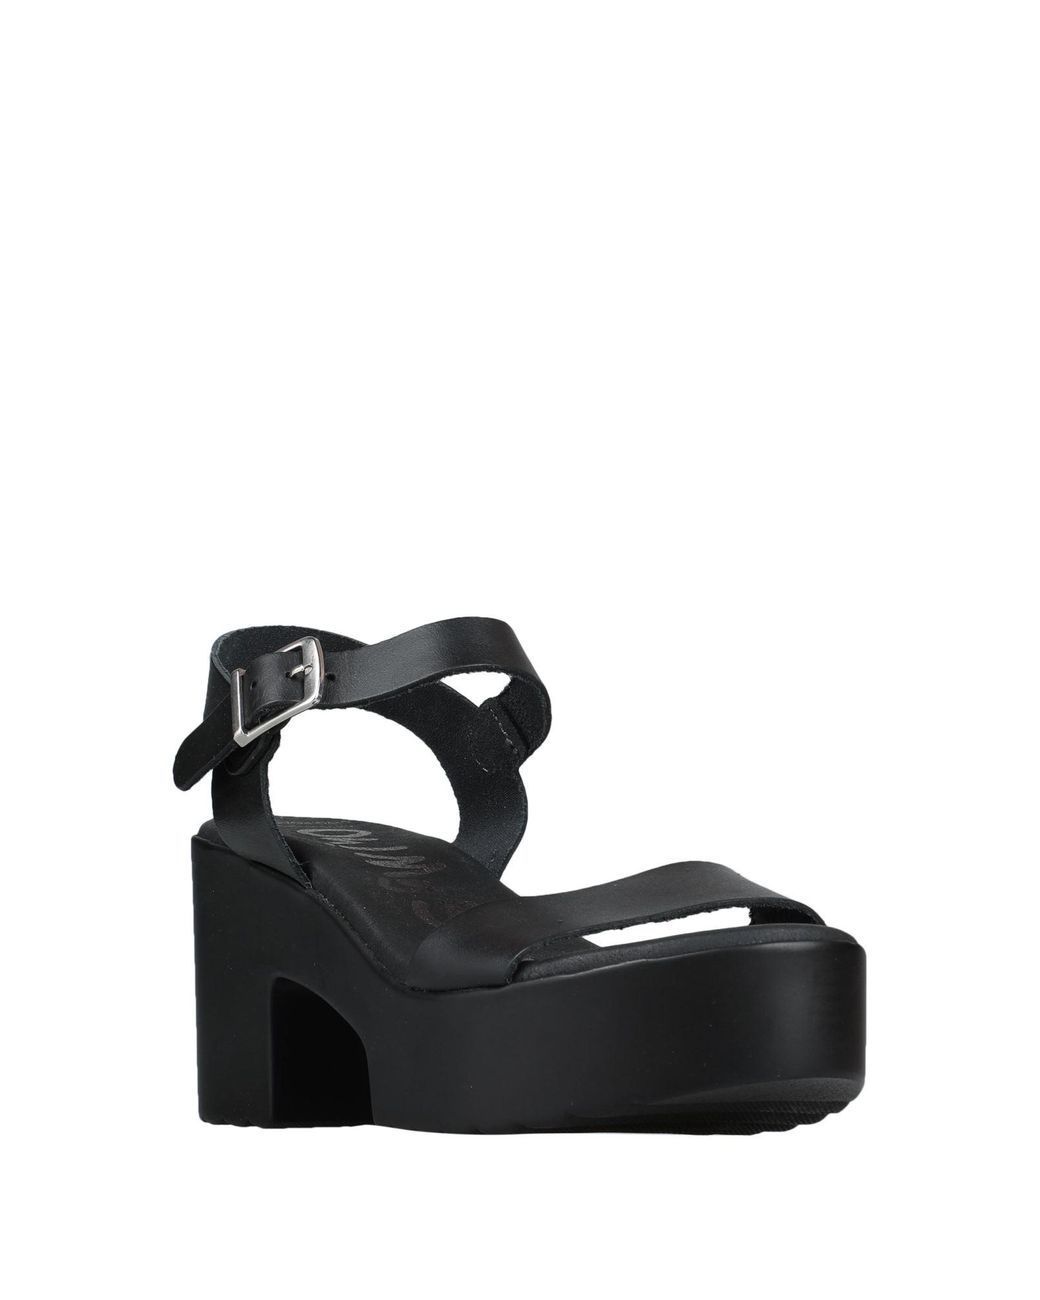 Oh My Sandals Sandals in Black | Lyst